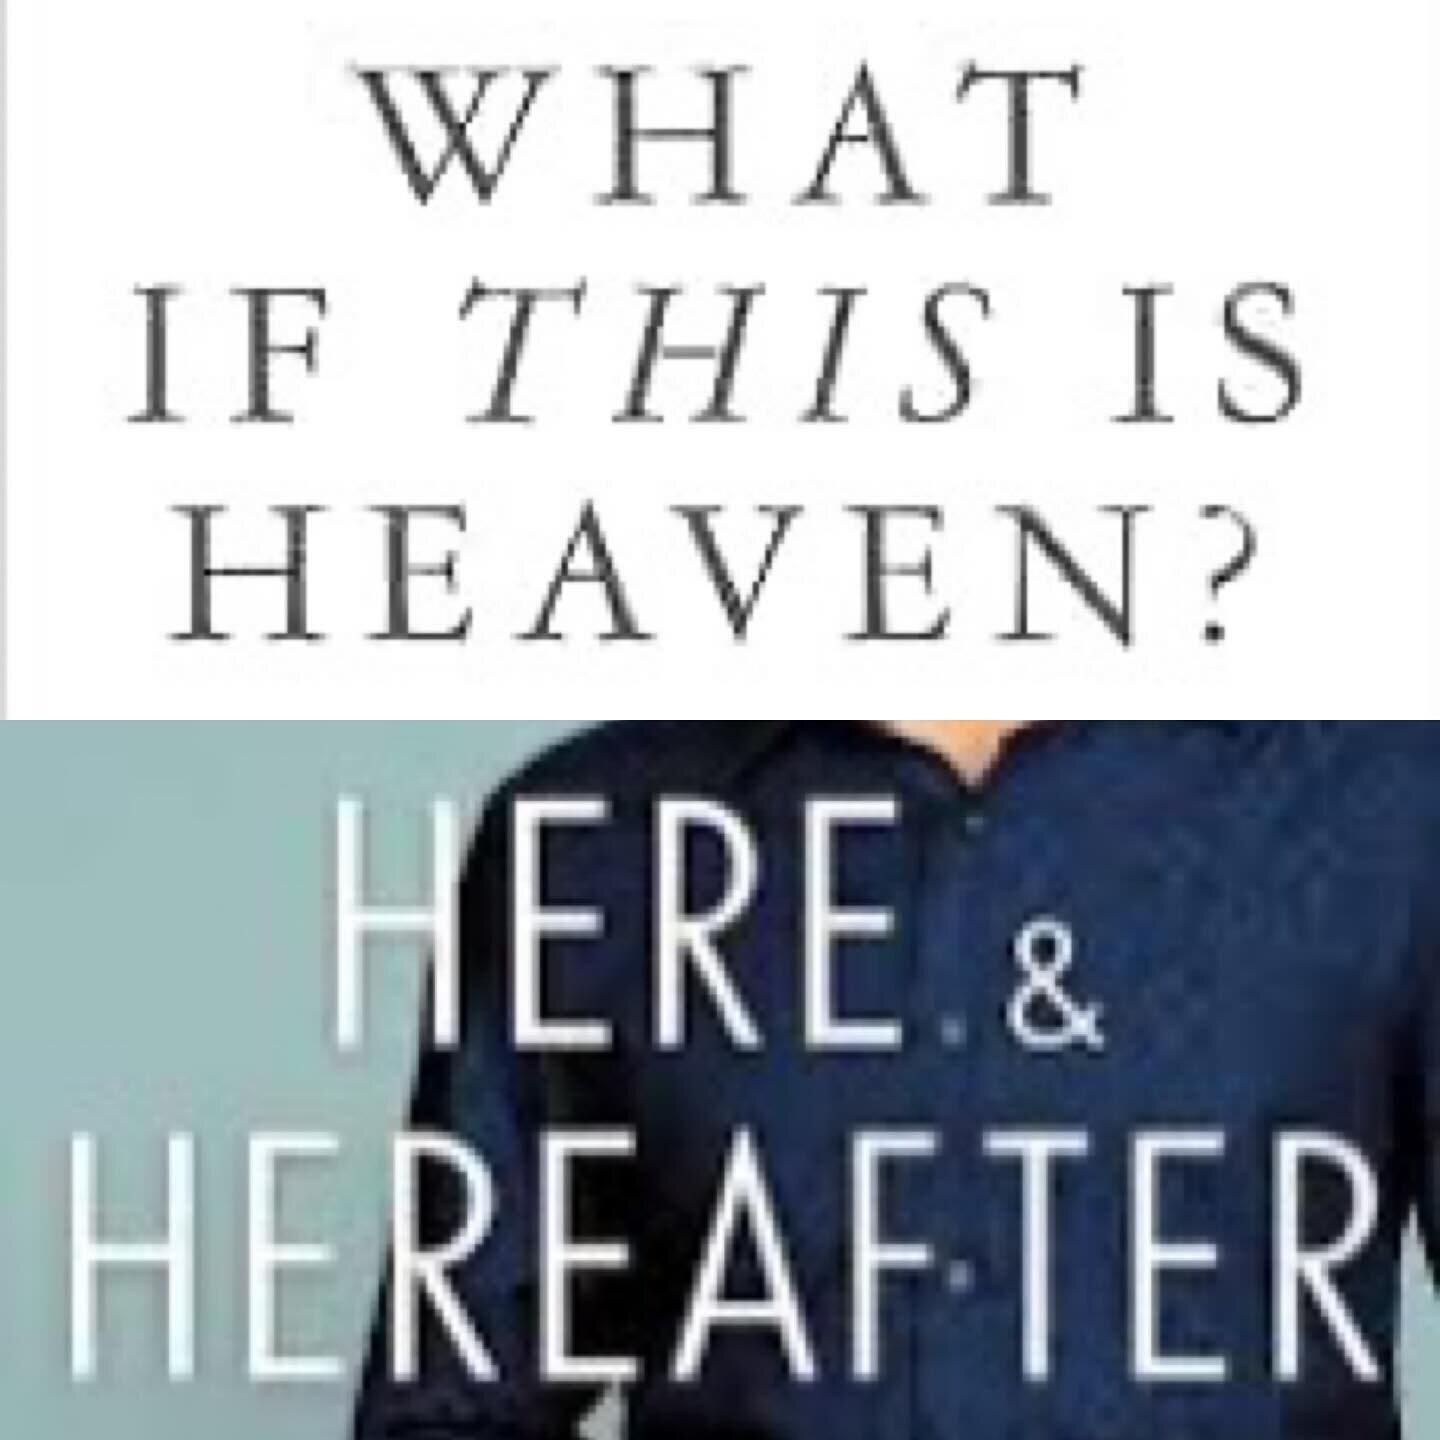 Transformative reads! Confronting my fear of death head-on with these two books on the afterlife was eye-opening and chock full of wisdom for the here and now. Highly recommend for anyone seeking perspective. 💫 #LifeAfterDeath #MustReads @anitamoorj